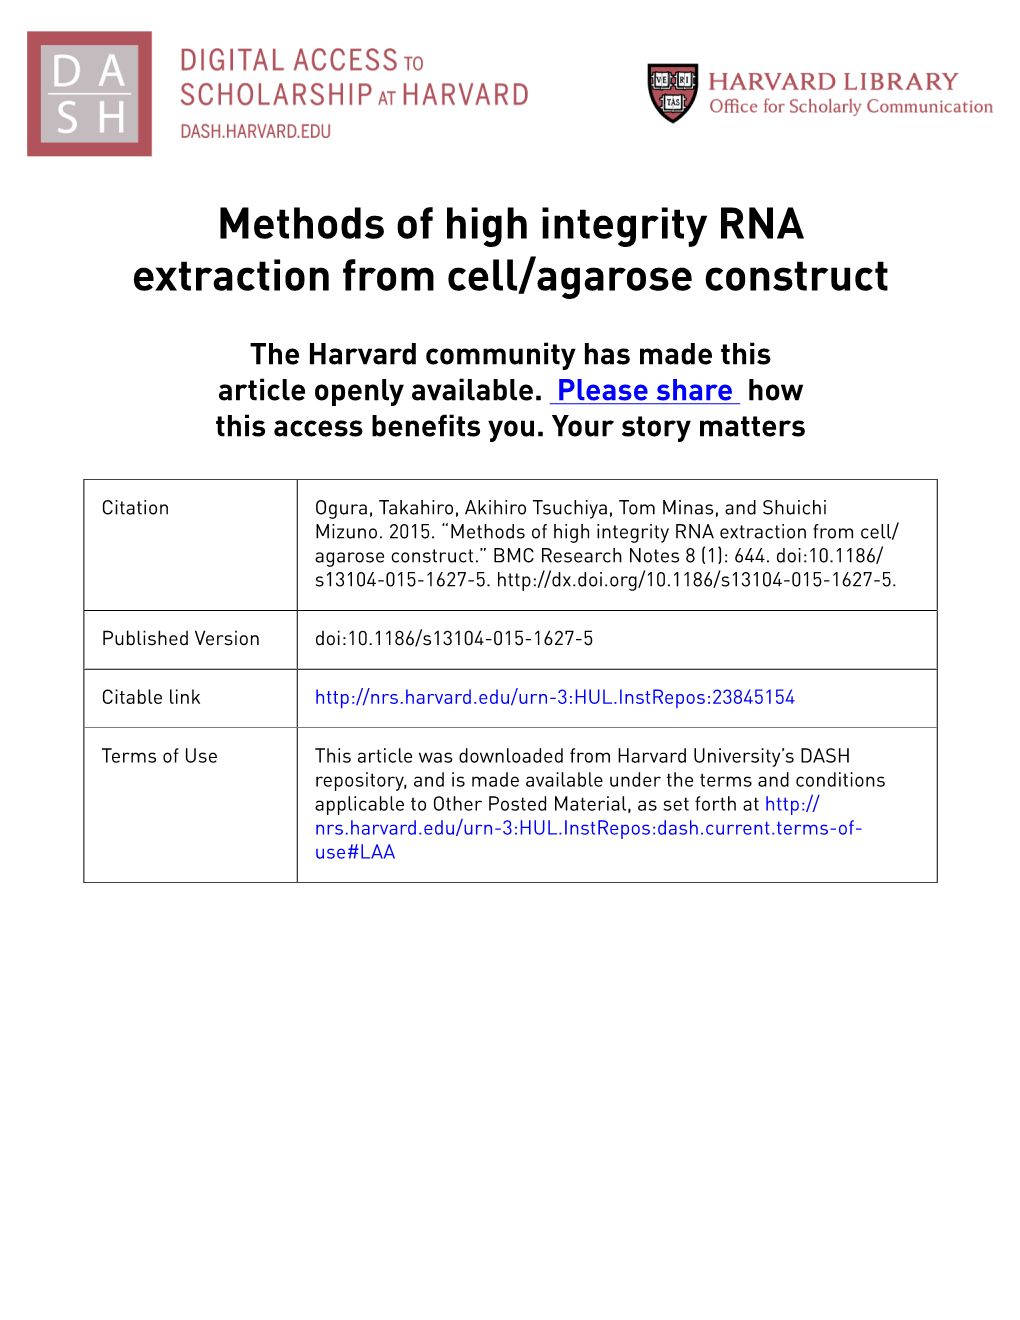 Methods of High Integrity RNA Extraction from Cell/Agarose Construct